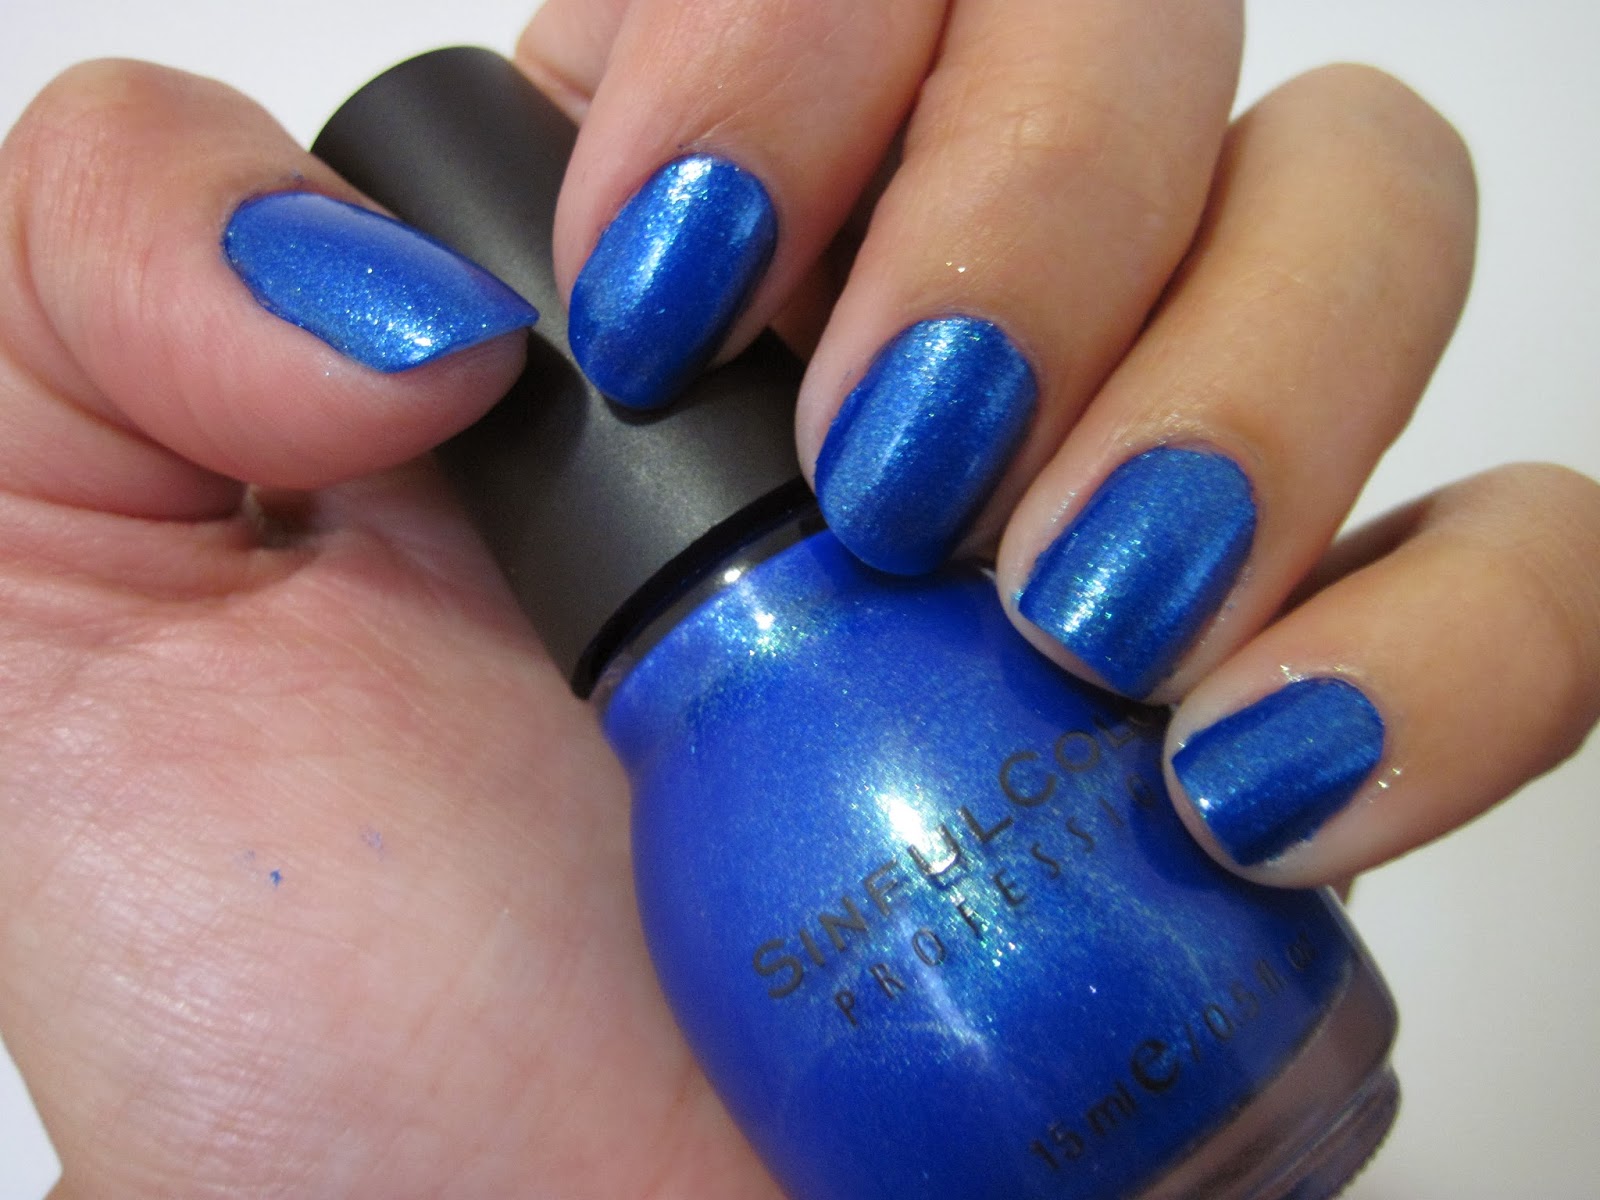 1. Sinful Colors Professional Nail Polish - 1353 Endless Blue - wide 4